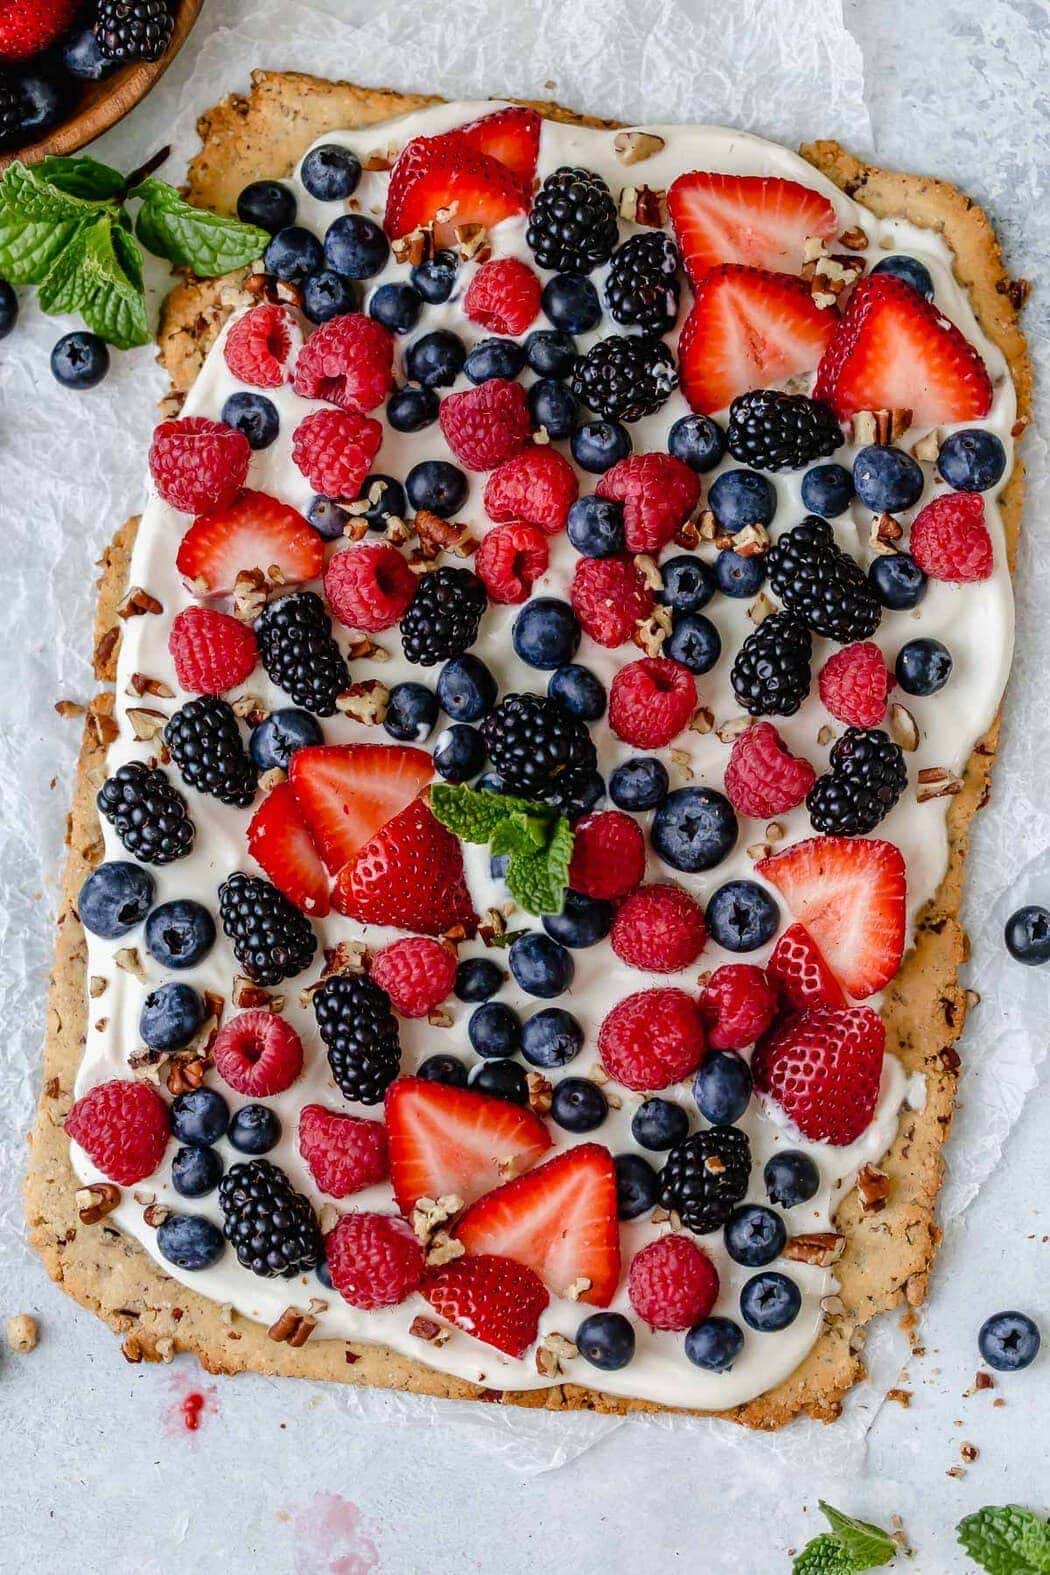 Overhead photo of Gluten-free Berry Fruit Pizza garnished with a spring of mint in the center. Pizza is topped with an assortment of berry, chopped pecans and a sprig of mint leaves.